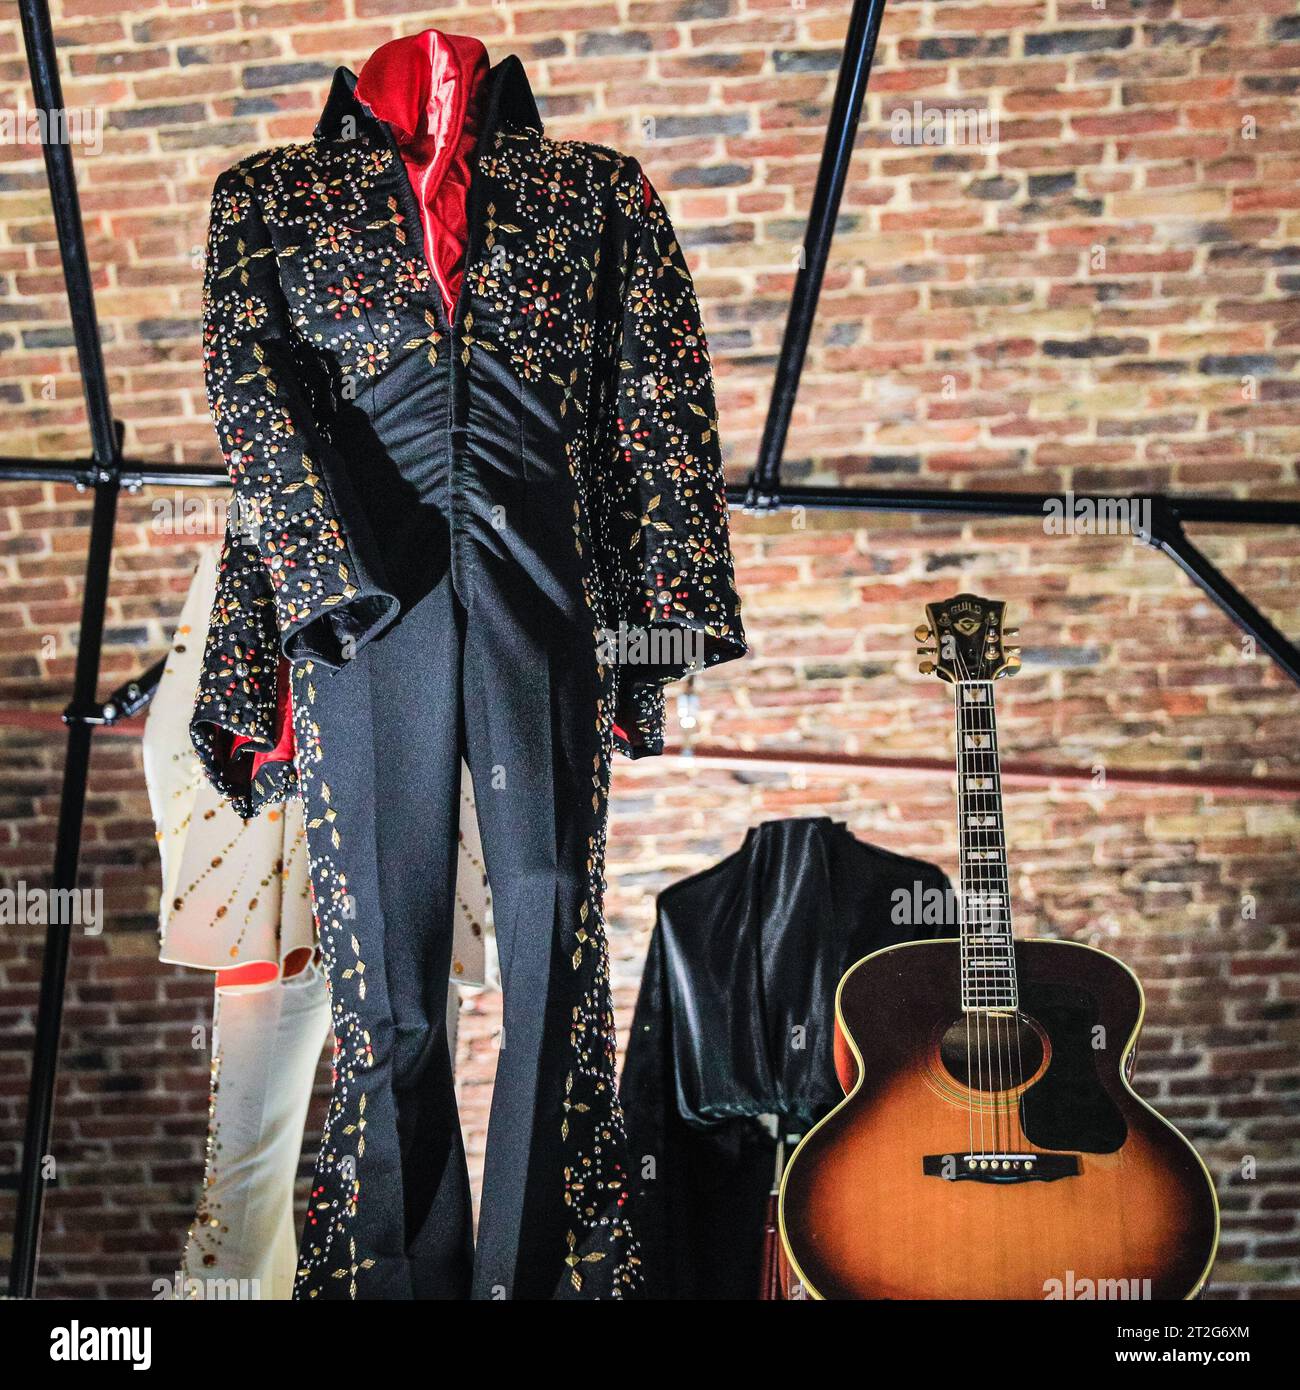 London, UK. 19th Oct, 2023. The dark blue jumpsuit worn for the Aloha From Hawaii concert during Elvis's live satellite broadcast in 1973, and later also worn at his Las Vegas residency. The 'Direct from Graceland: Elvis' exhibition features over 400 artefacts and iconic belongings owned by Elvis, direct from the icon's Graceland home in Memphis, Tennessee. The exhibition opens on Oct 20 at the Arches London Bridge venue in Bermondsey Street. Credit: Imageplotter/Alamy Live News Stock Photo